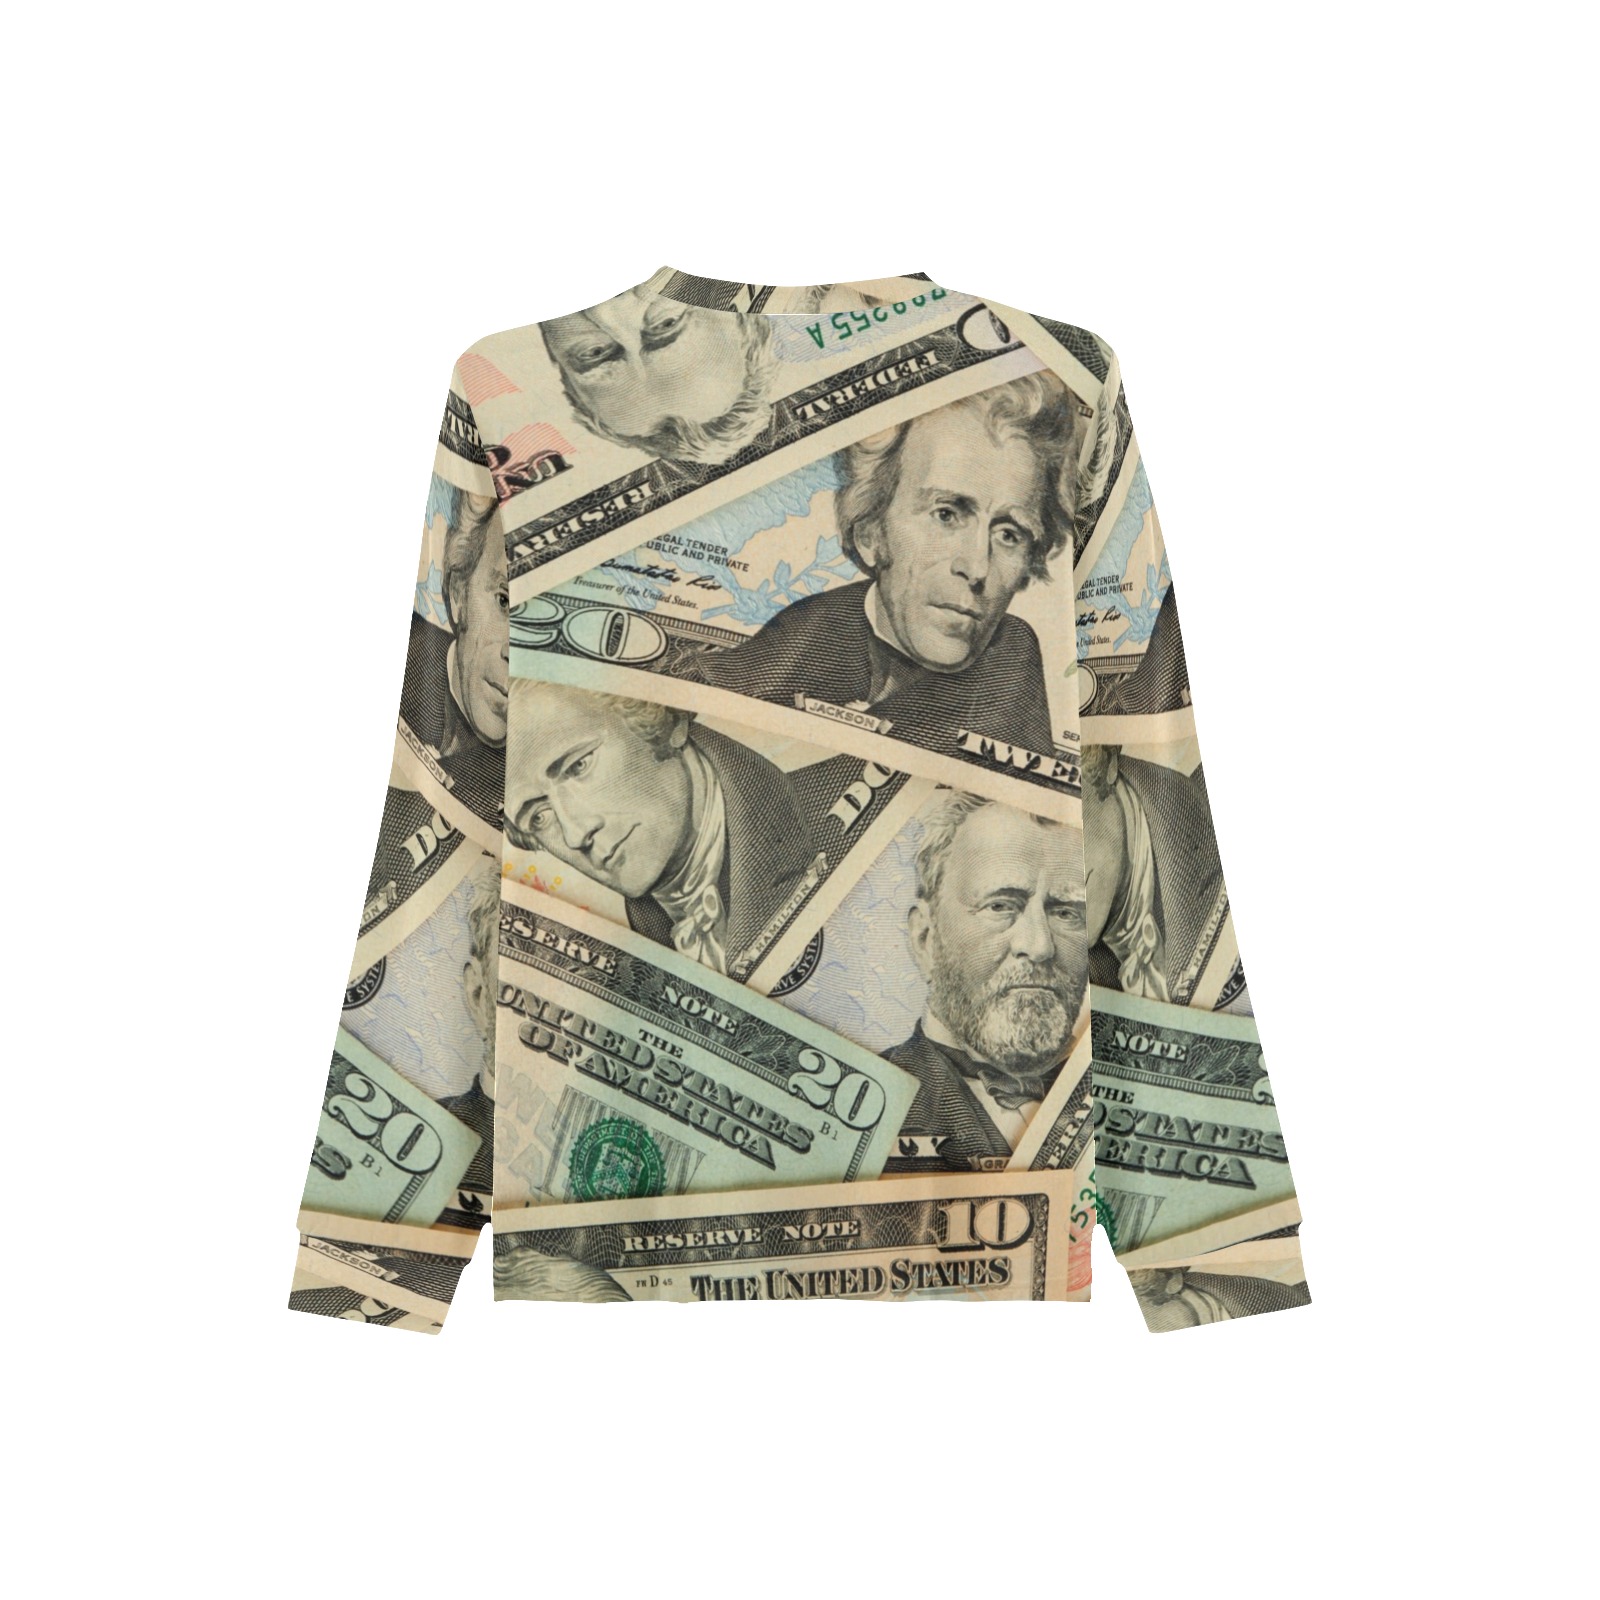 US PAPER CURRENCY Kids' All Over Print Pajama Top